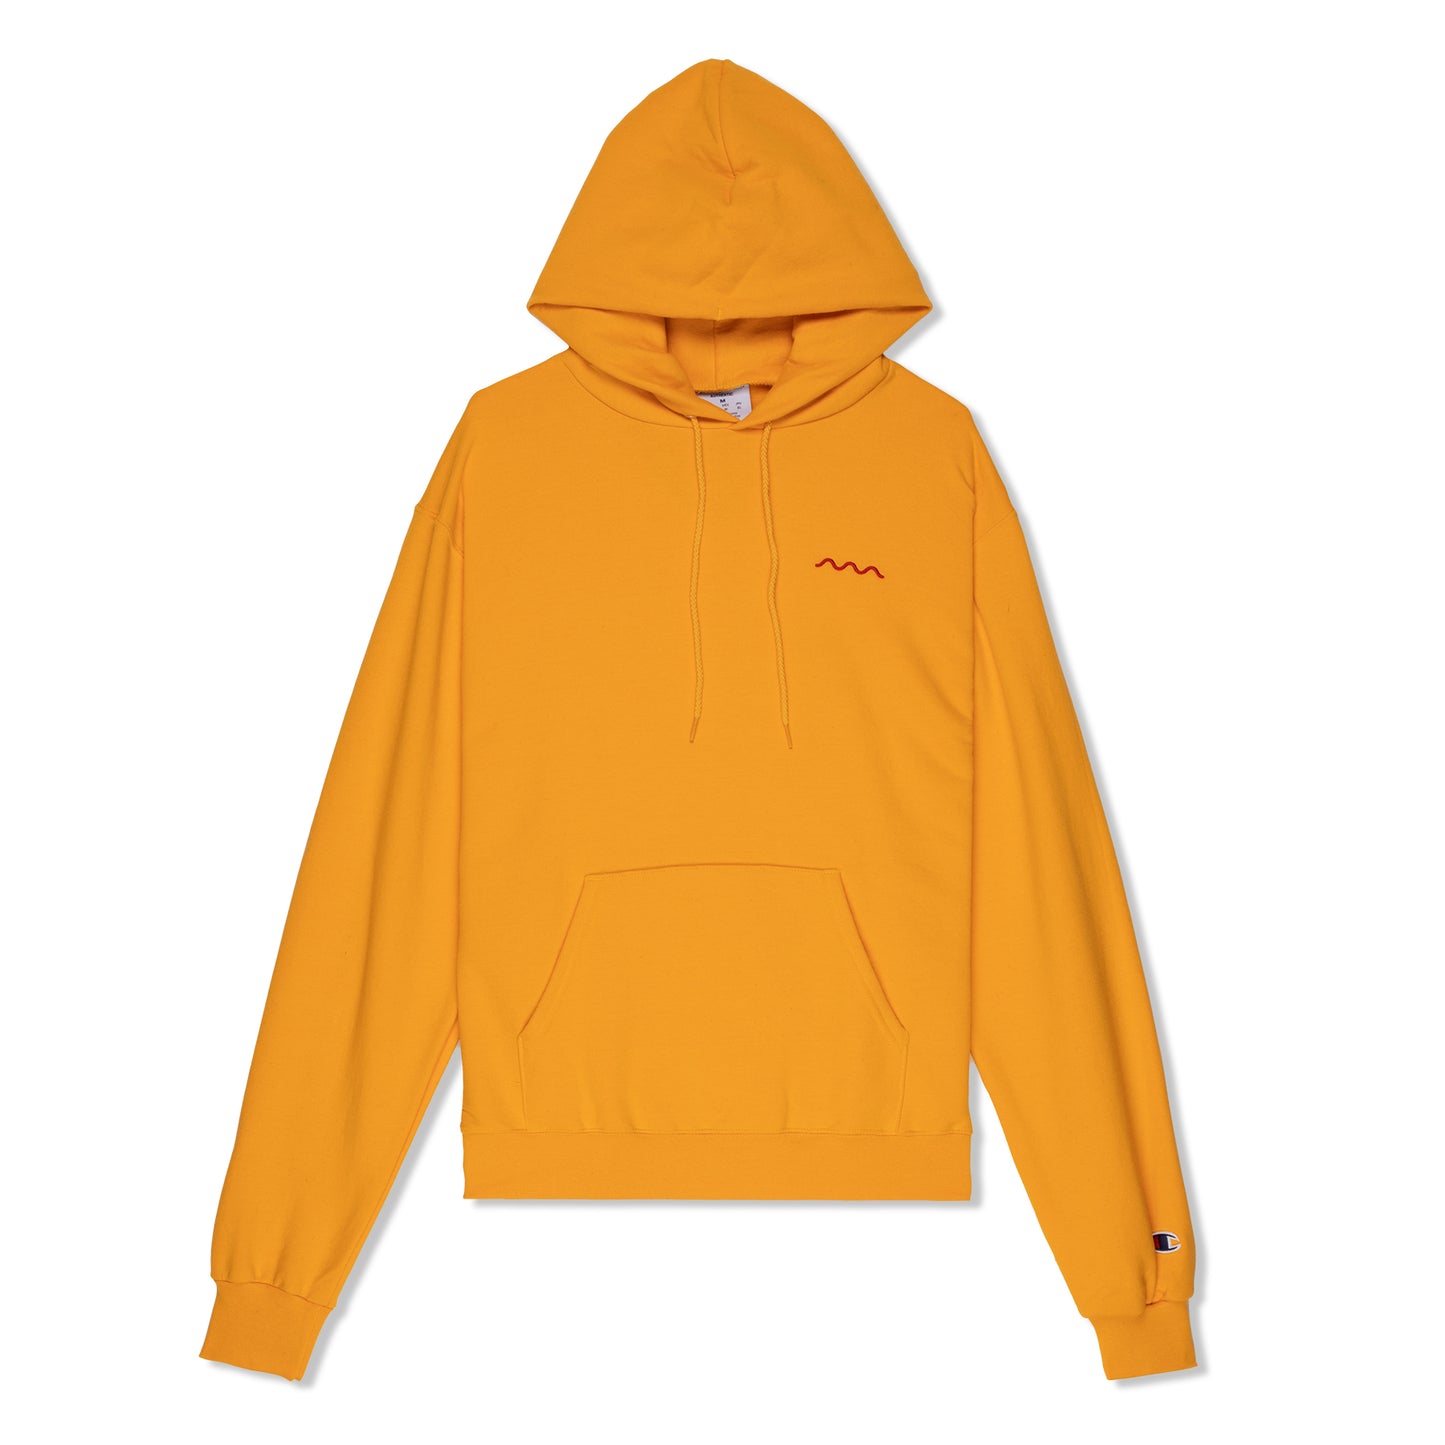 The Good Company Chill Wave Hoodie (Gold)